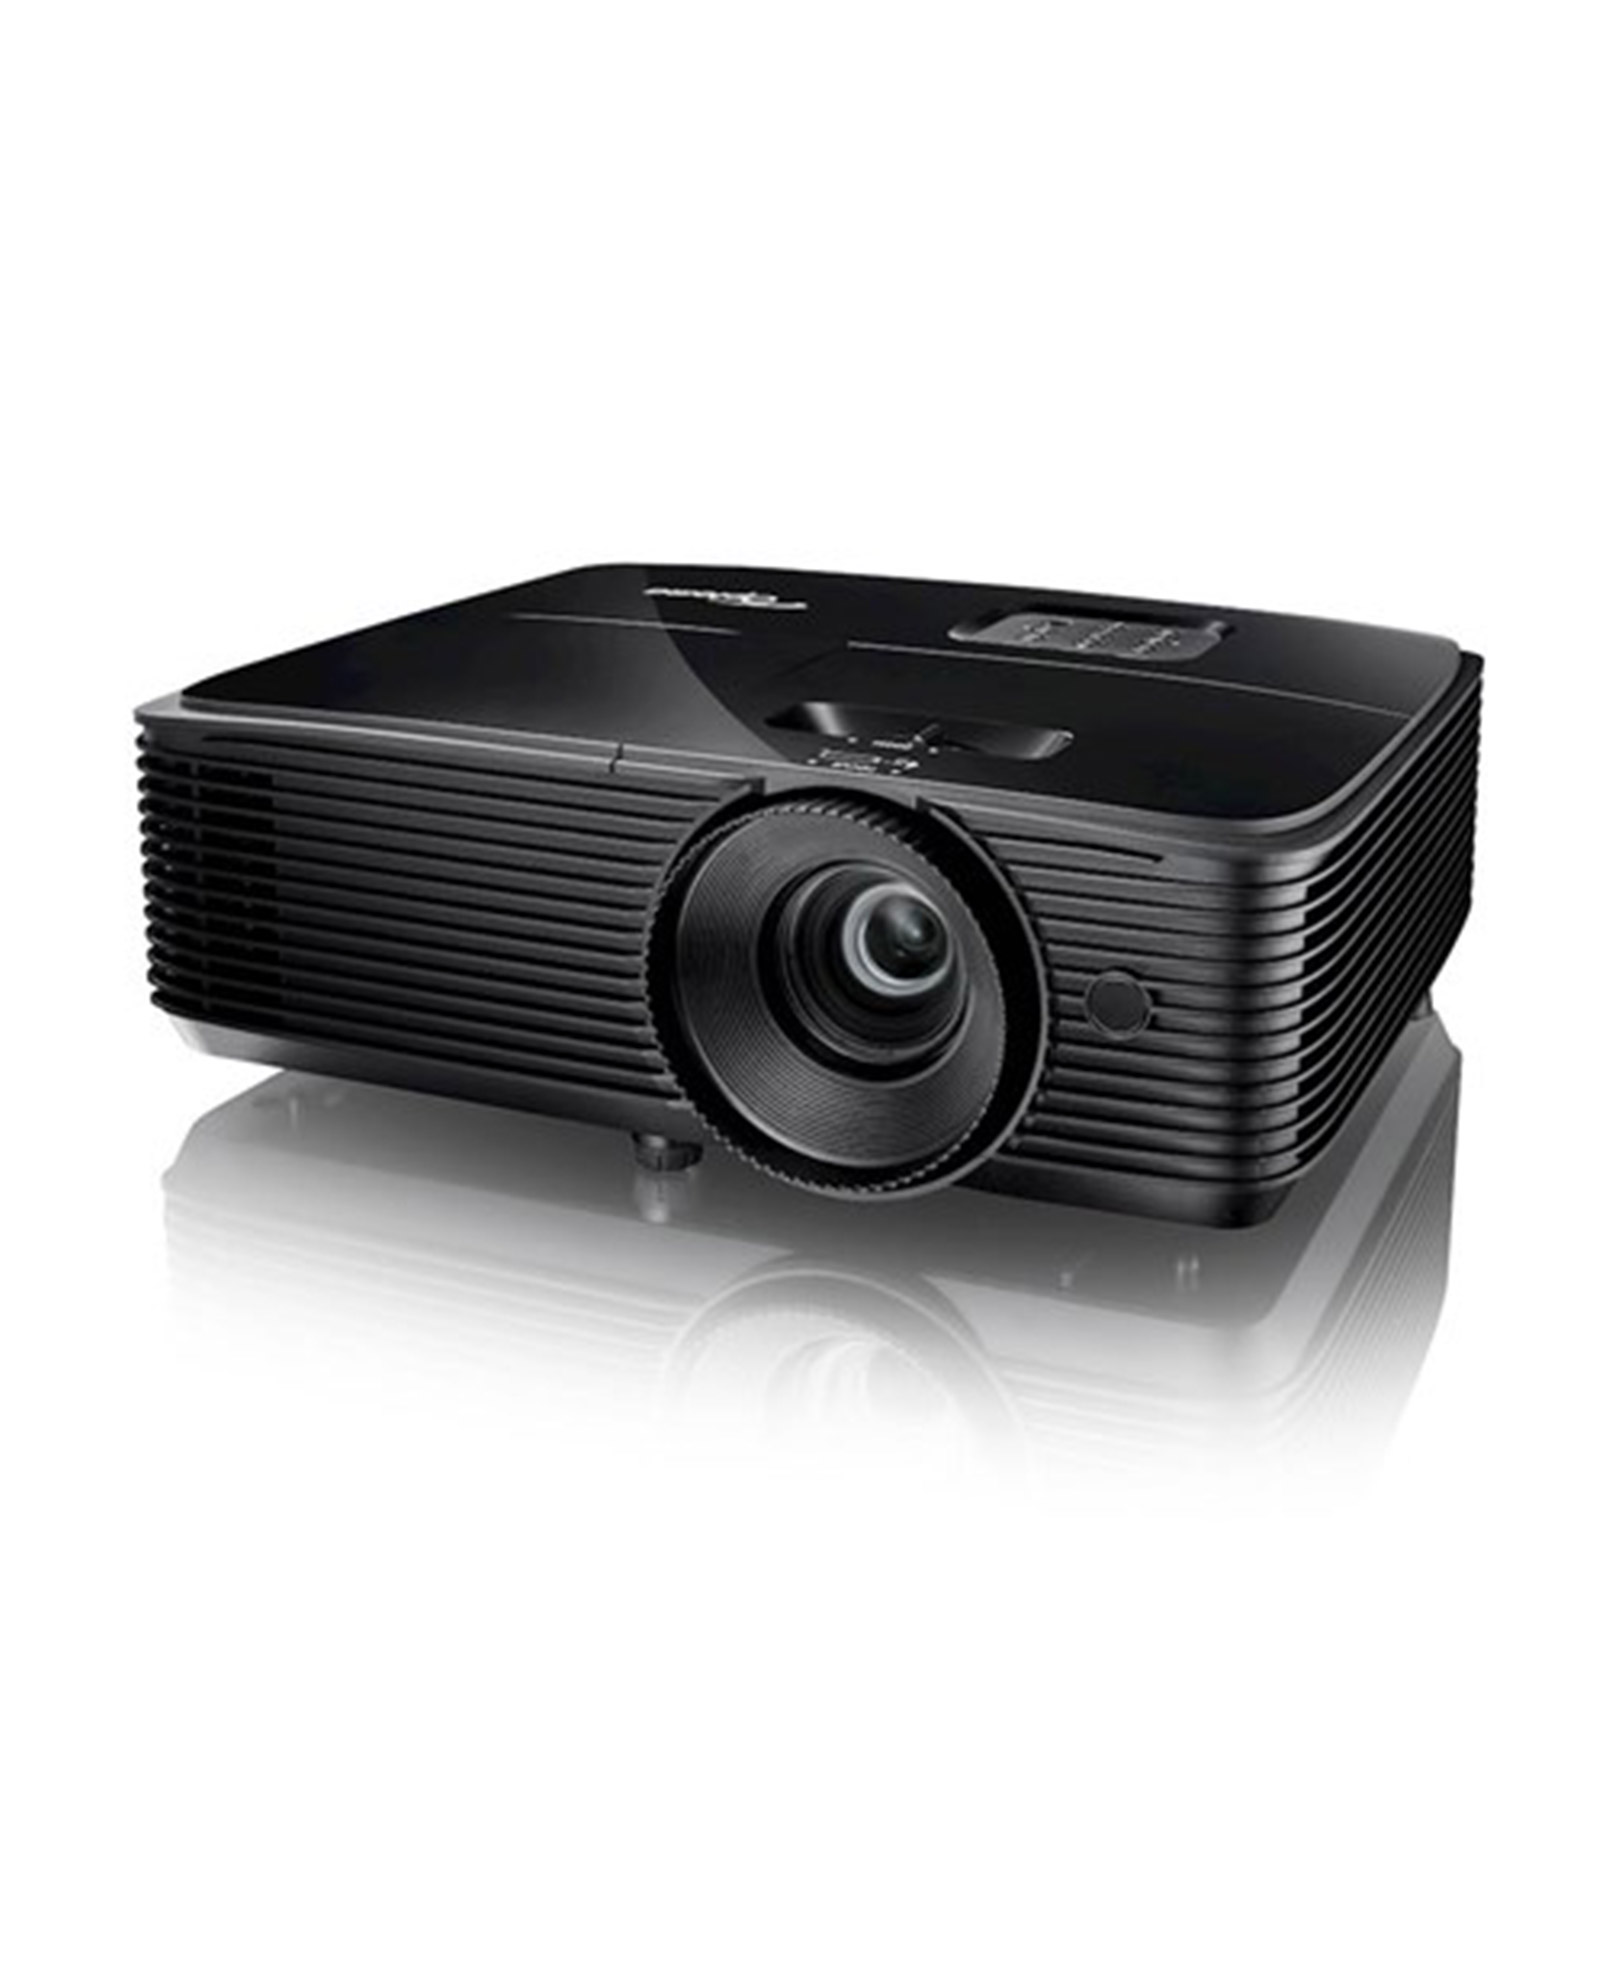 Optoma Hd28e 3800lm 1080p 30000 1 Home Entertainment Projector 3